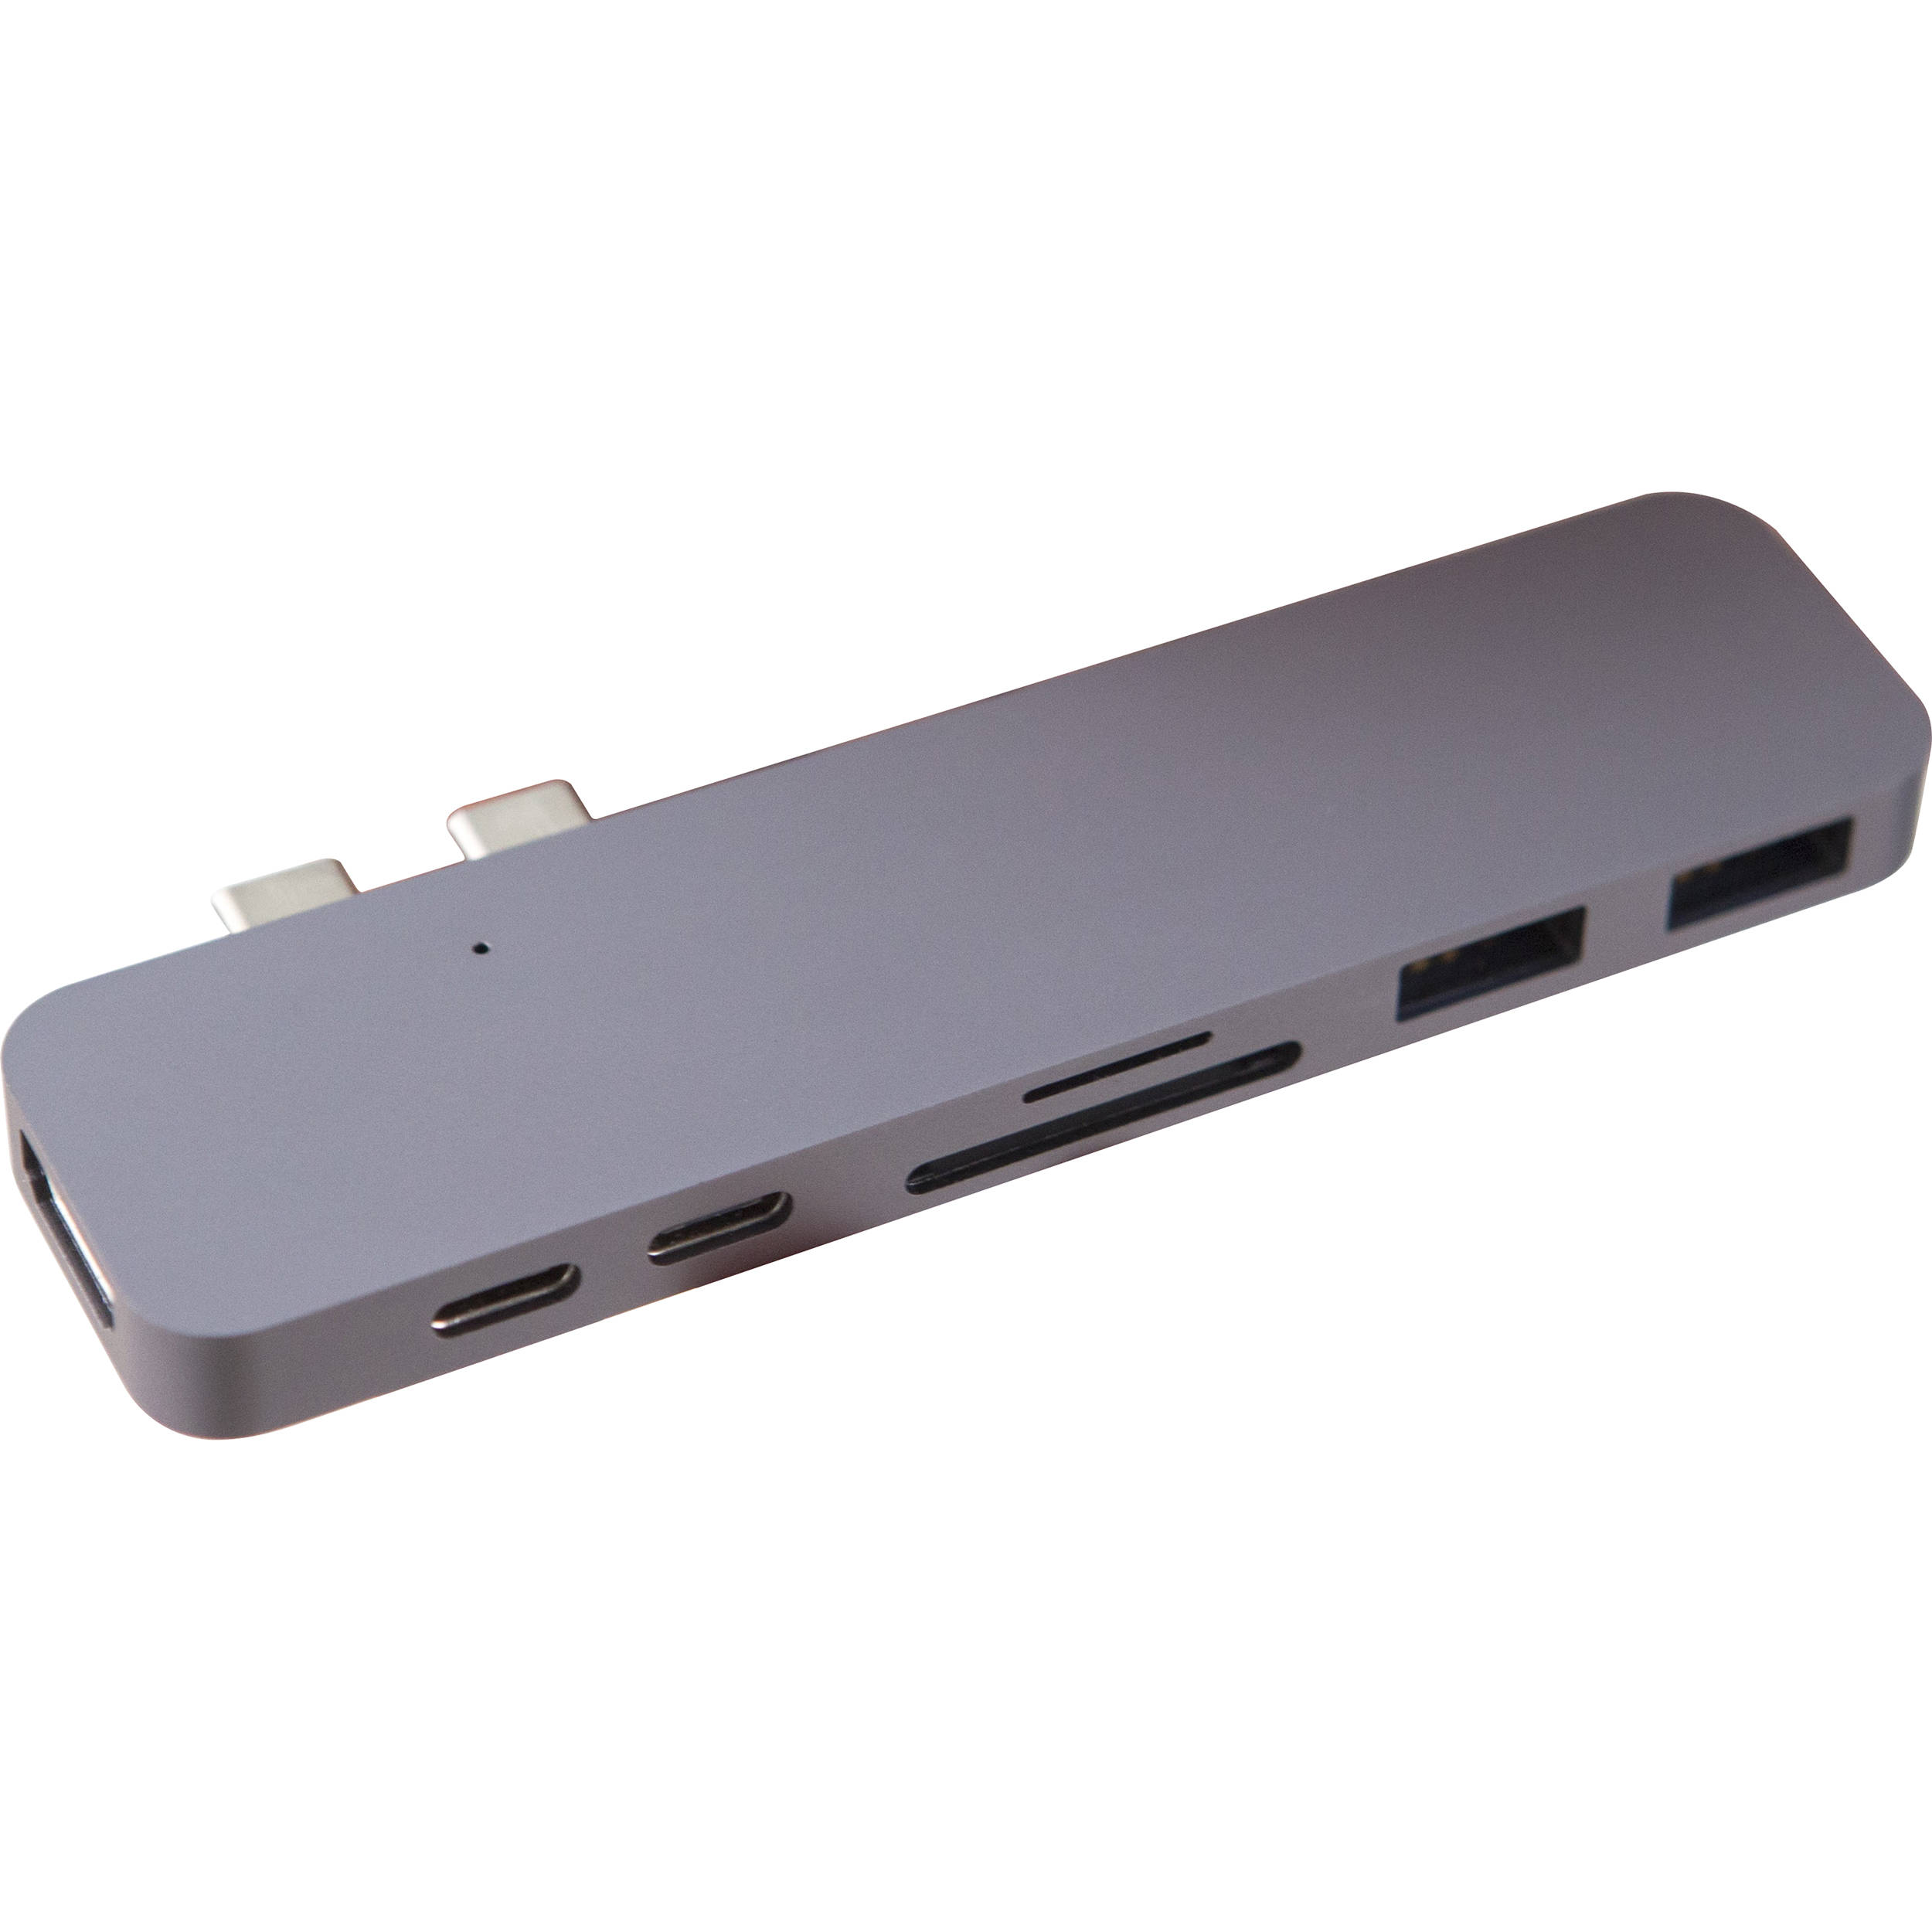 Usb For Mac Book Pro